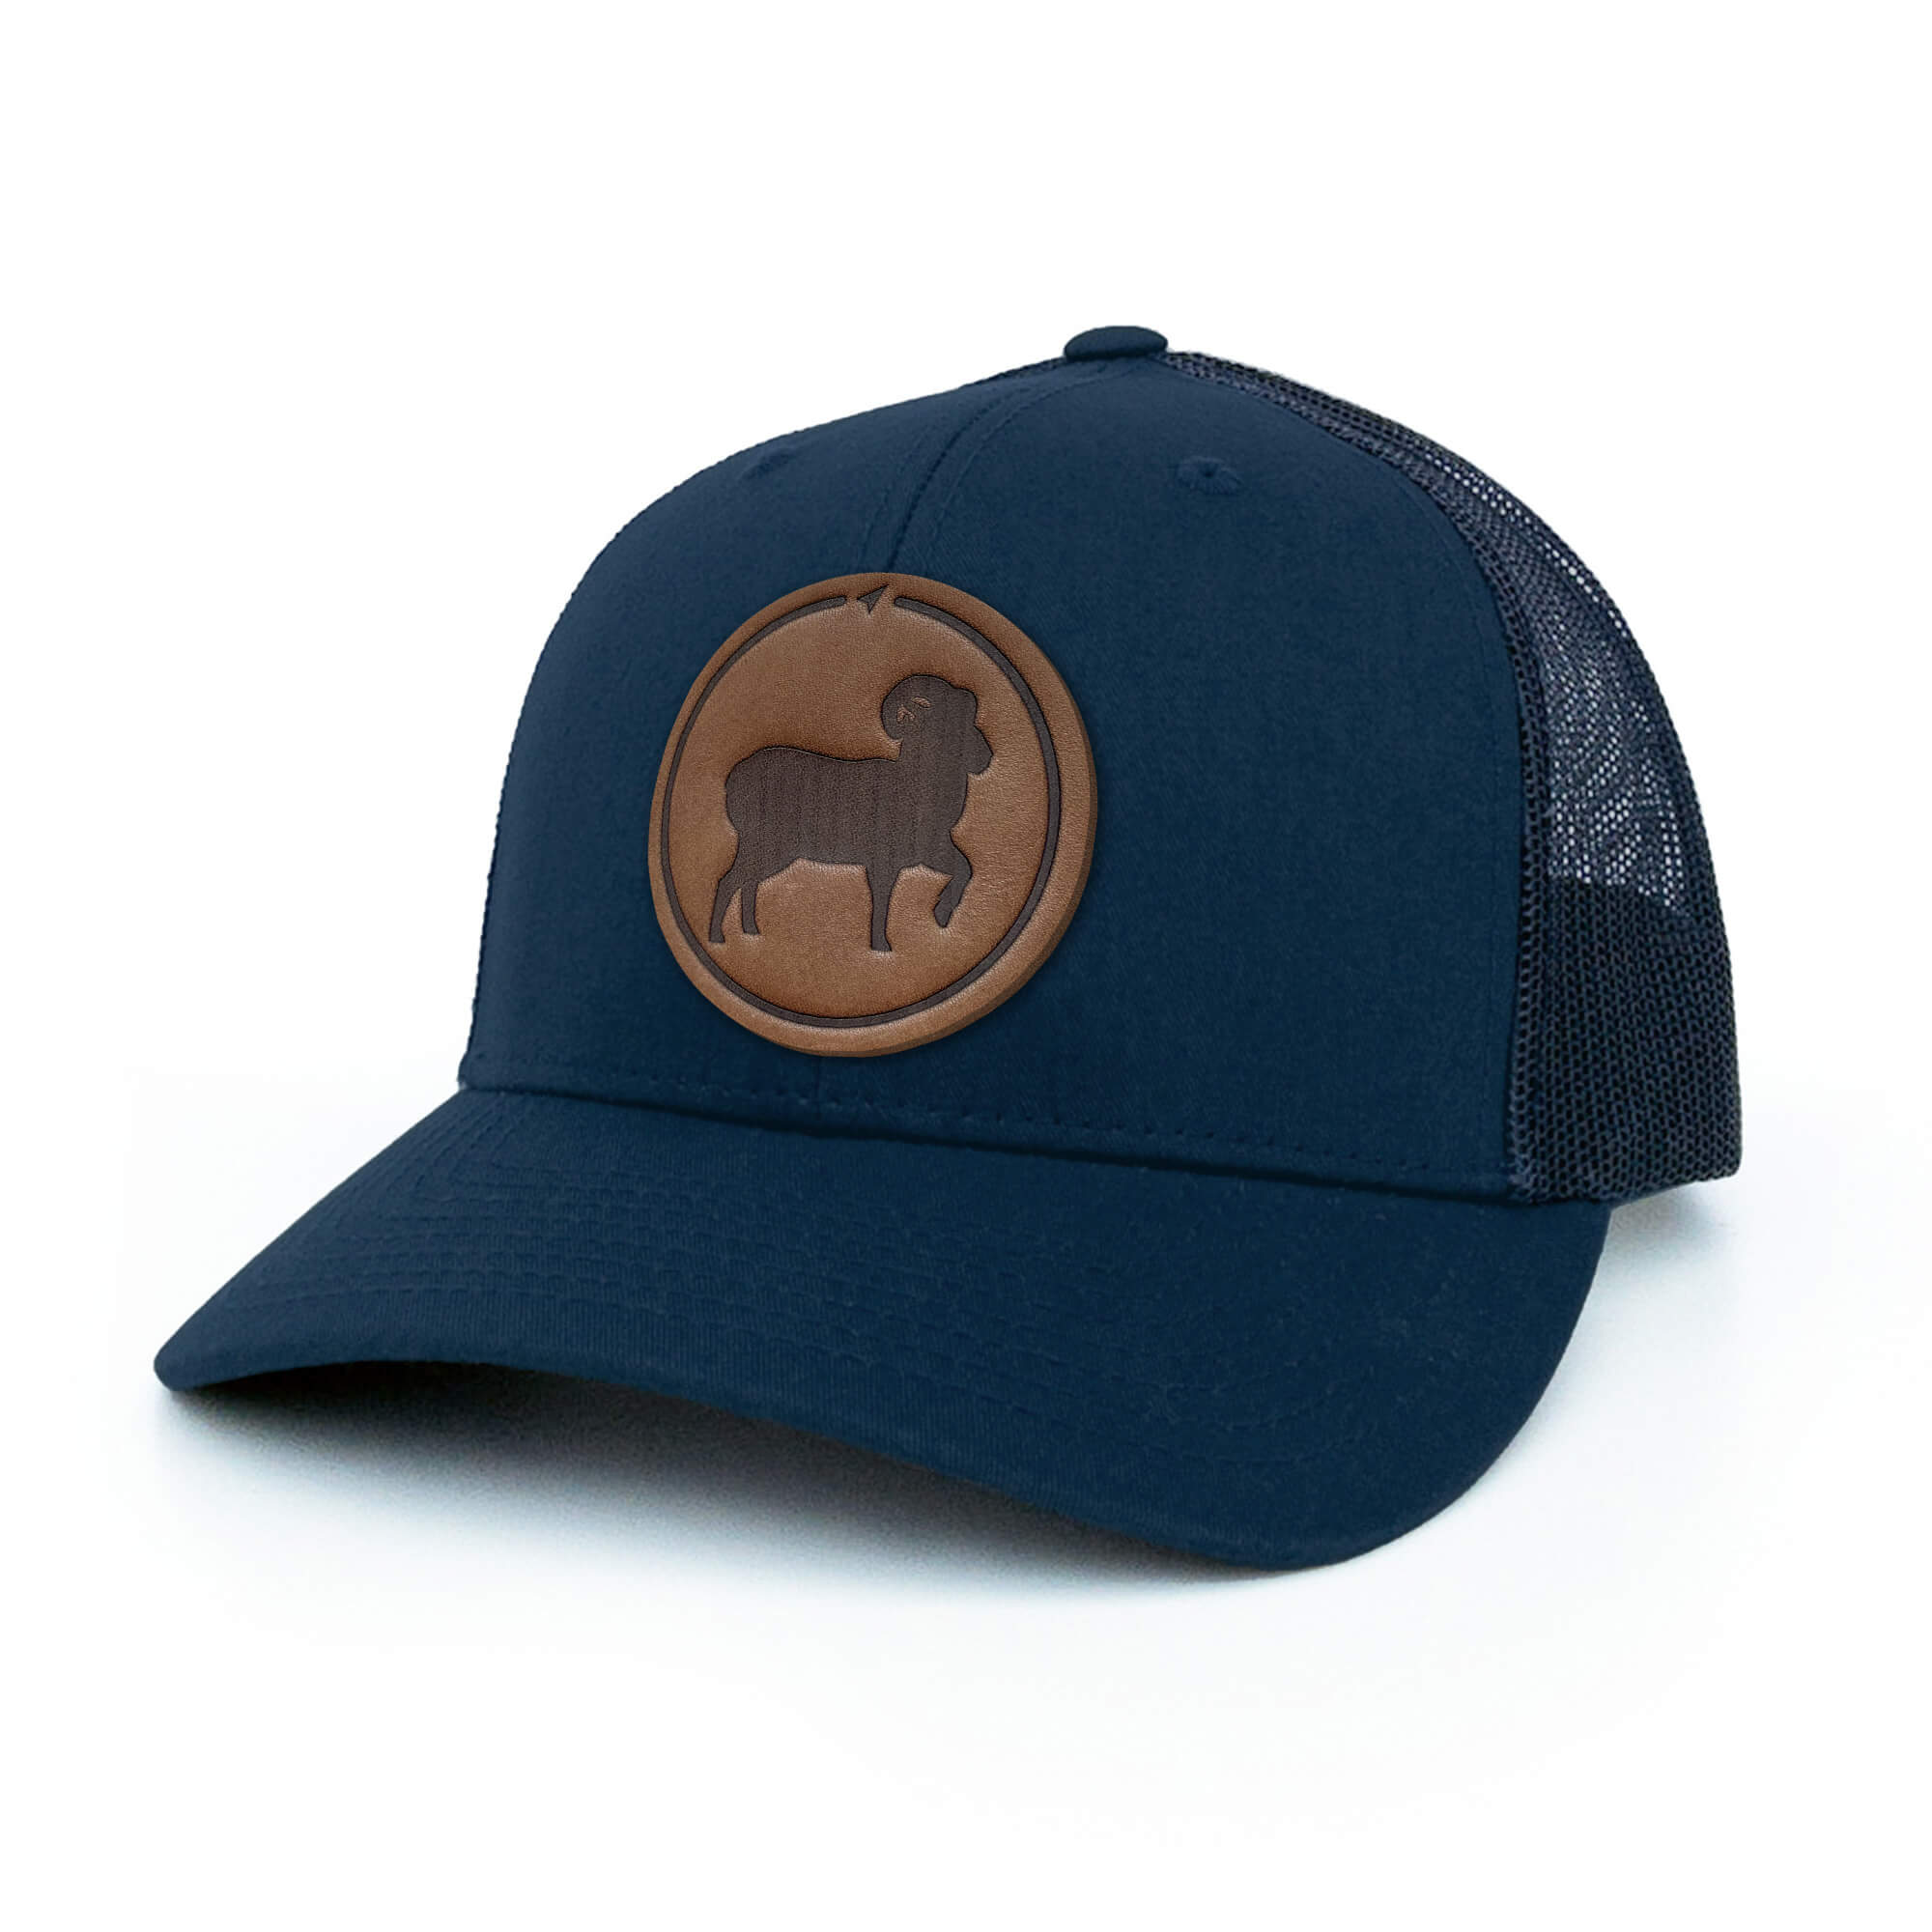 Navy trucker hat with full-grain leather patch of a Bighorn Sheep | BLACK-004-002, CHARC-004-002, NAVY-004-002, HGREY-004-002, MOSS-004-002, BROWN-004-002